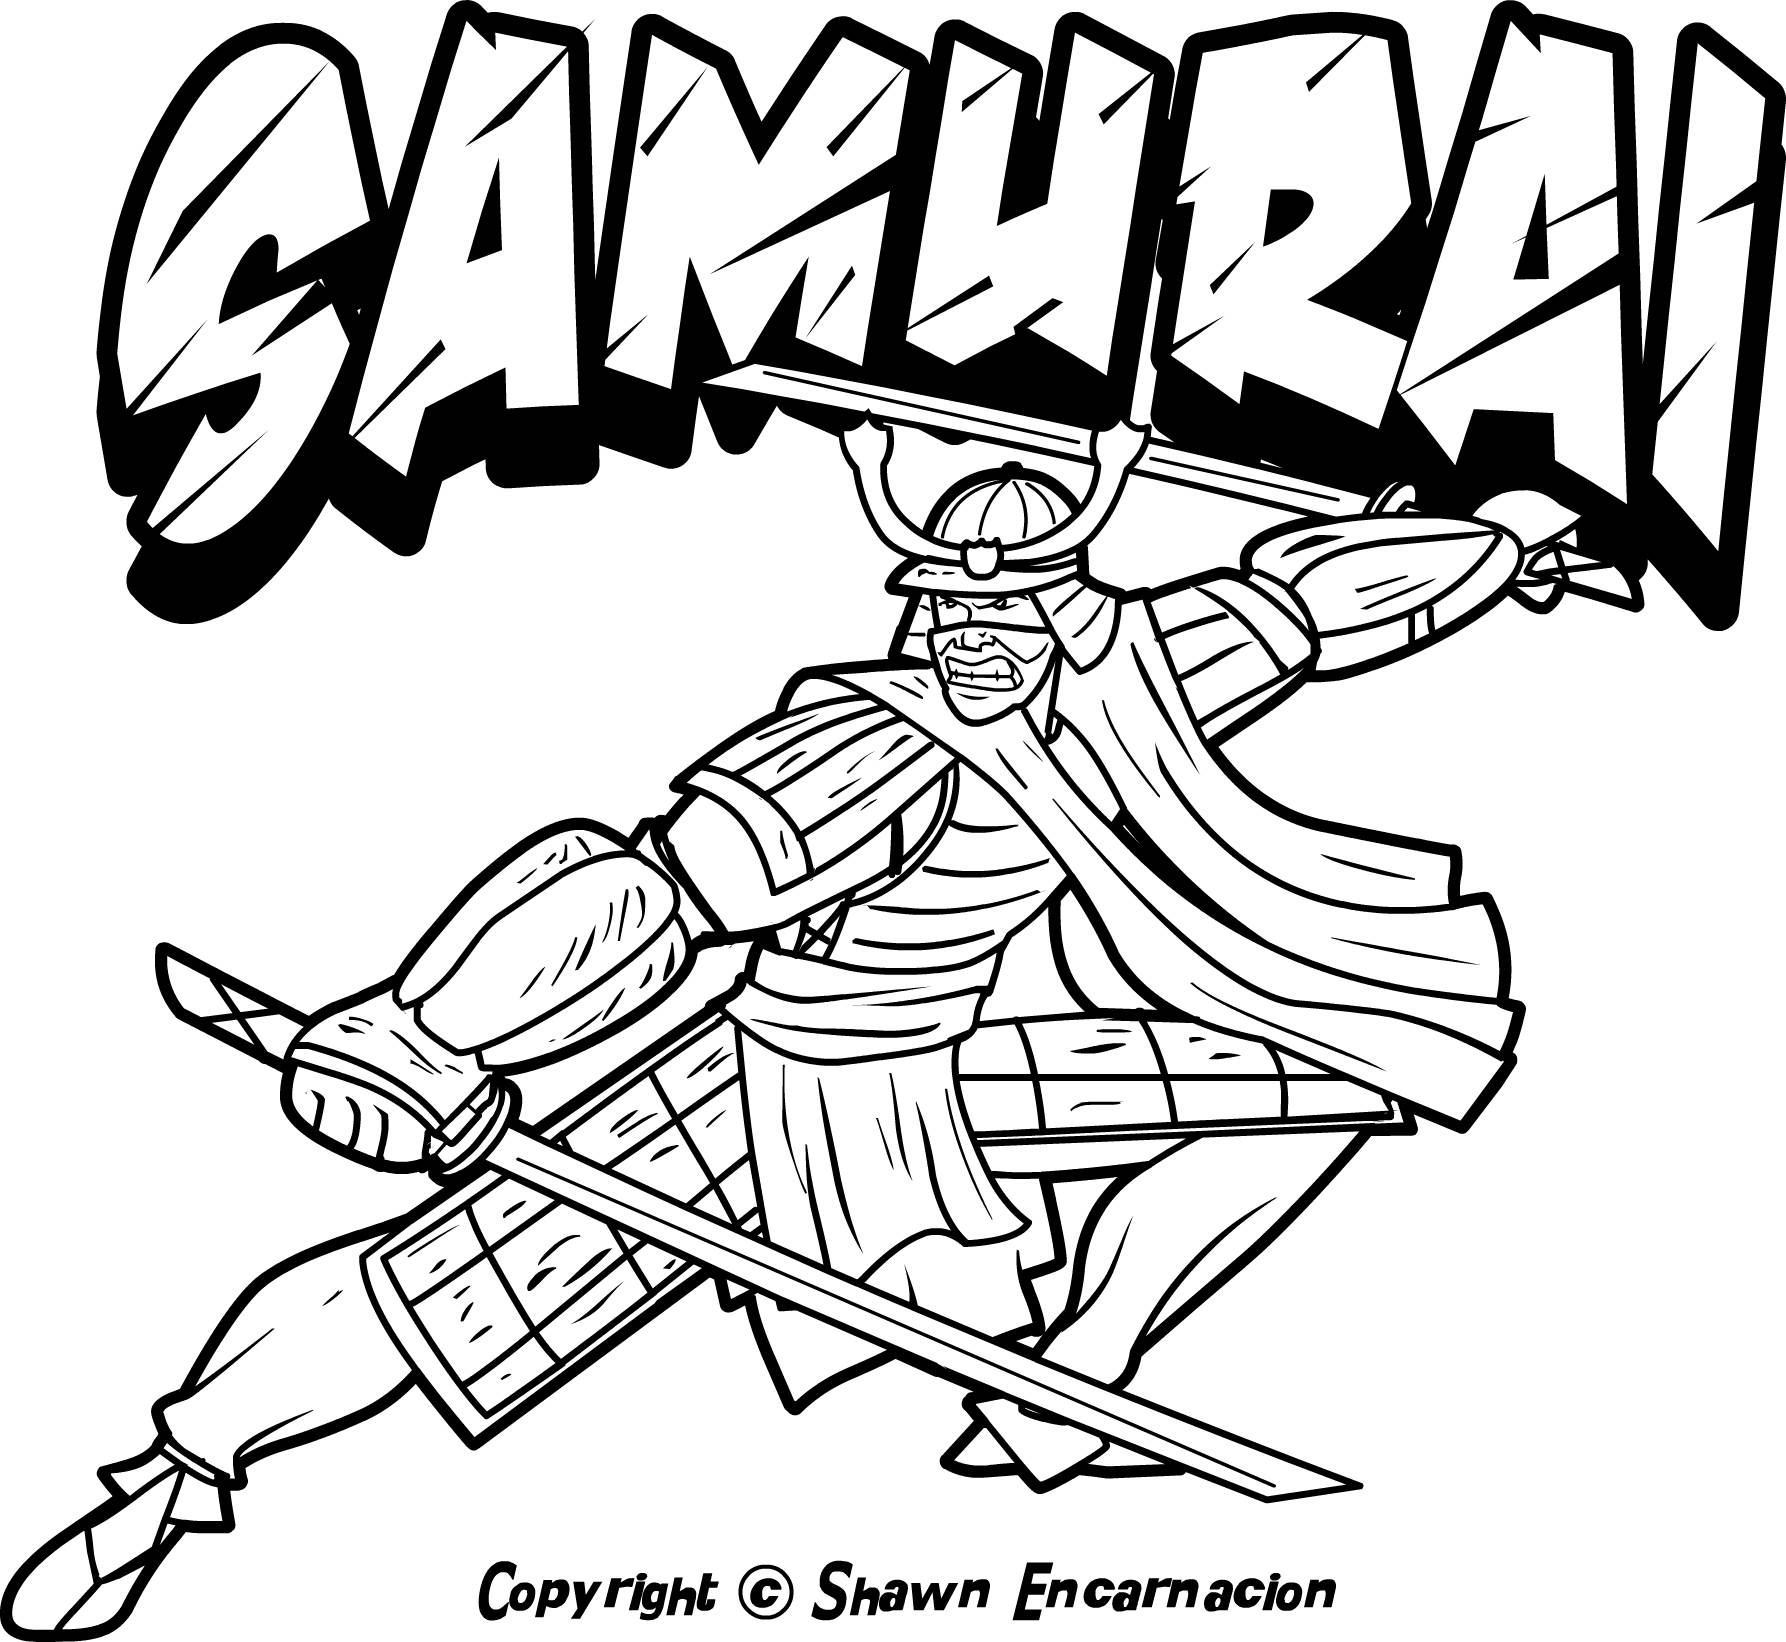 Chinese Samurai Coloring Page - Ð¡oloring Pages For All Ages